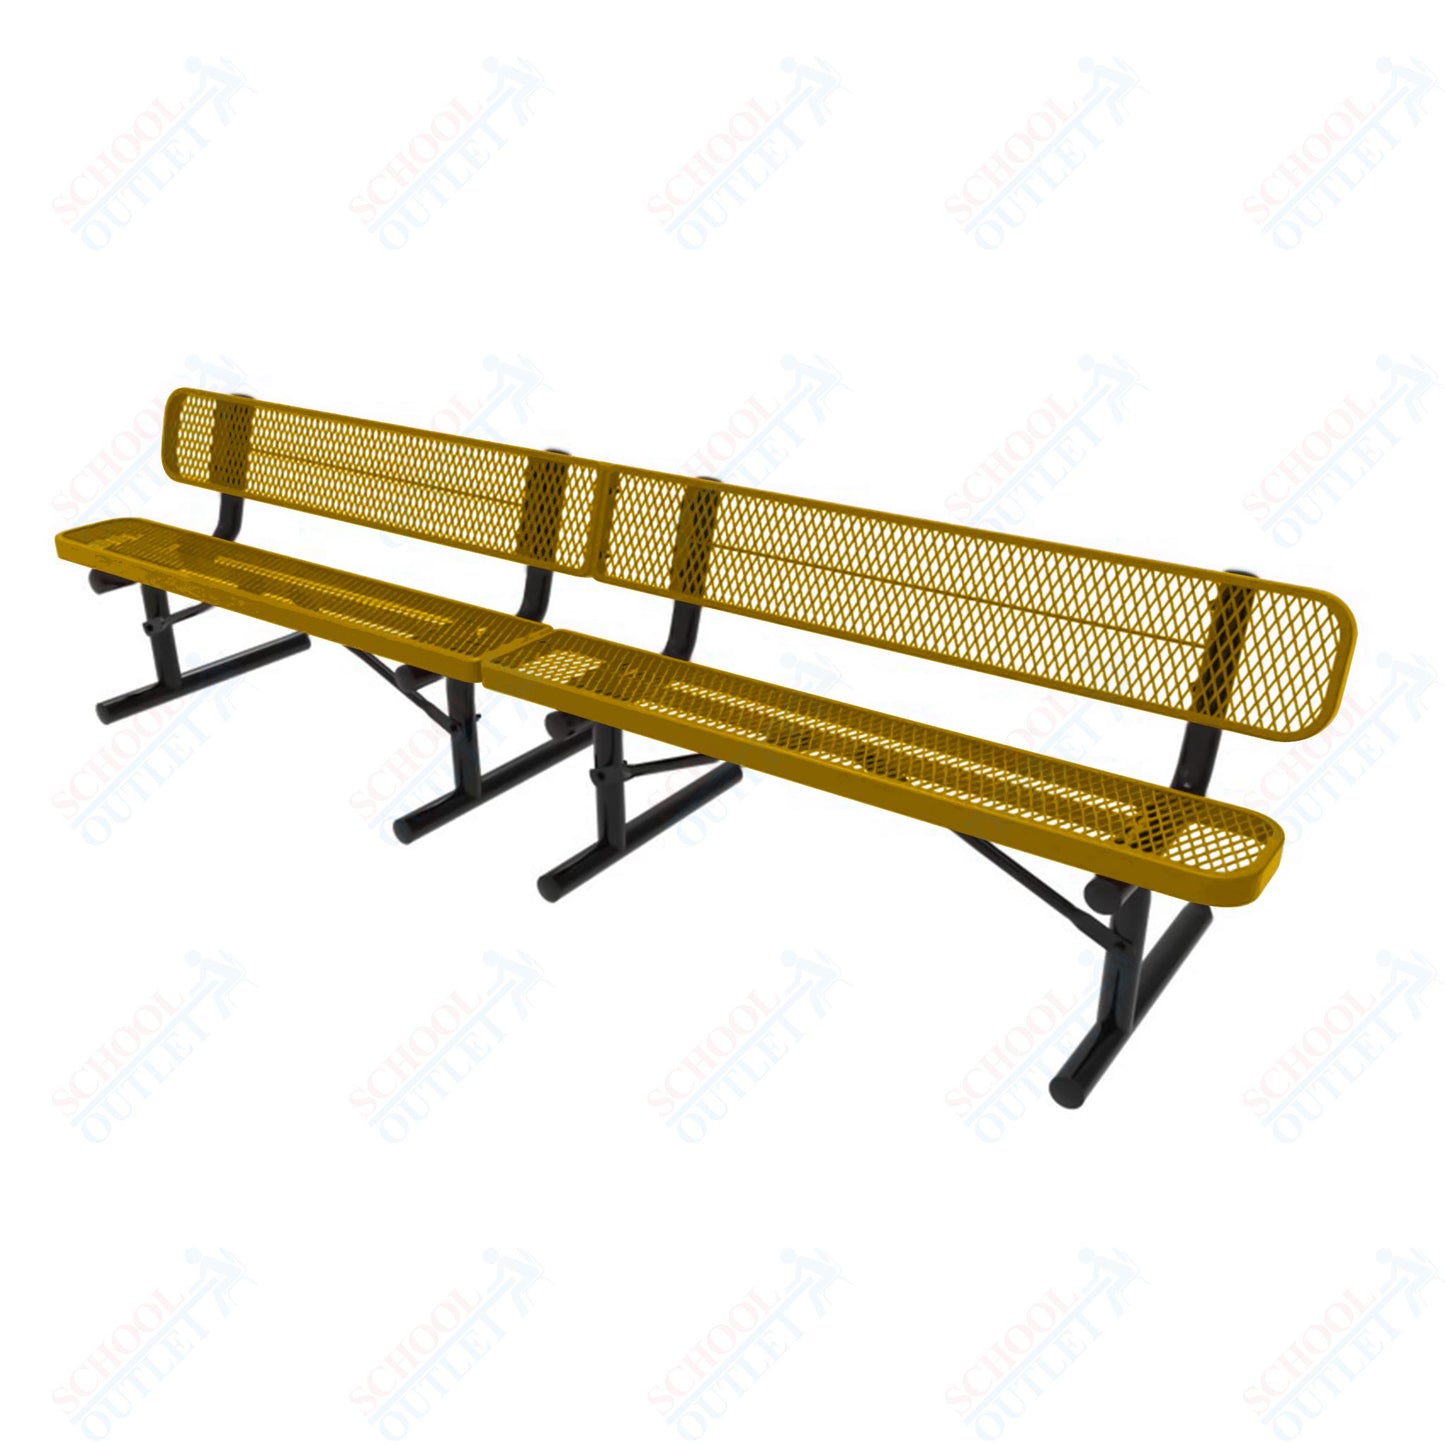 MyTcoat - Standard Portable Outdoor Bench with Back 10' L (MYT-BRT10-18)